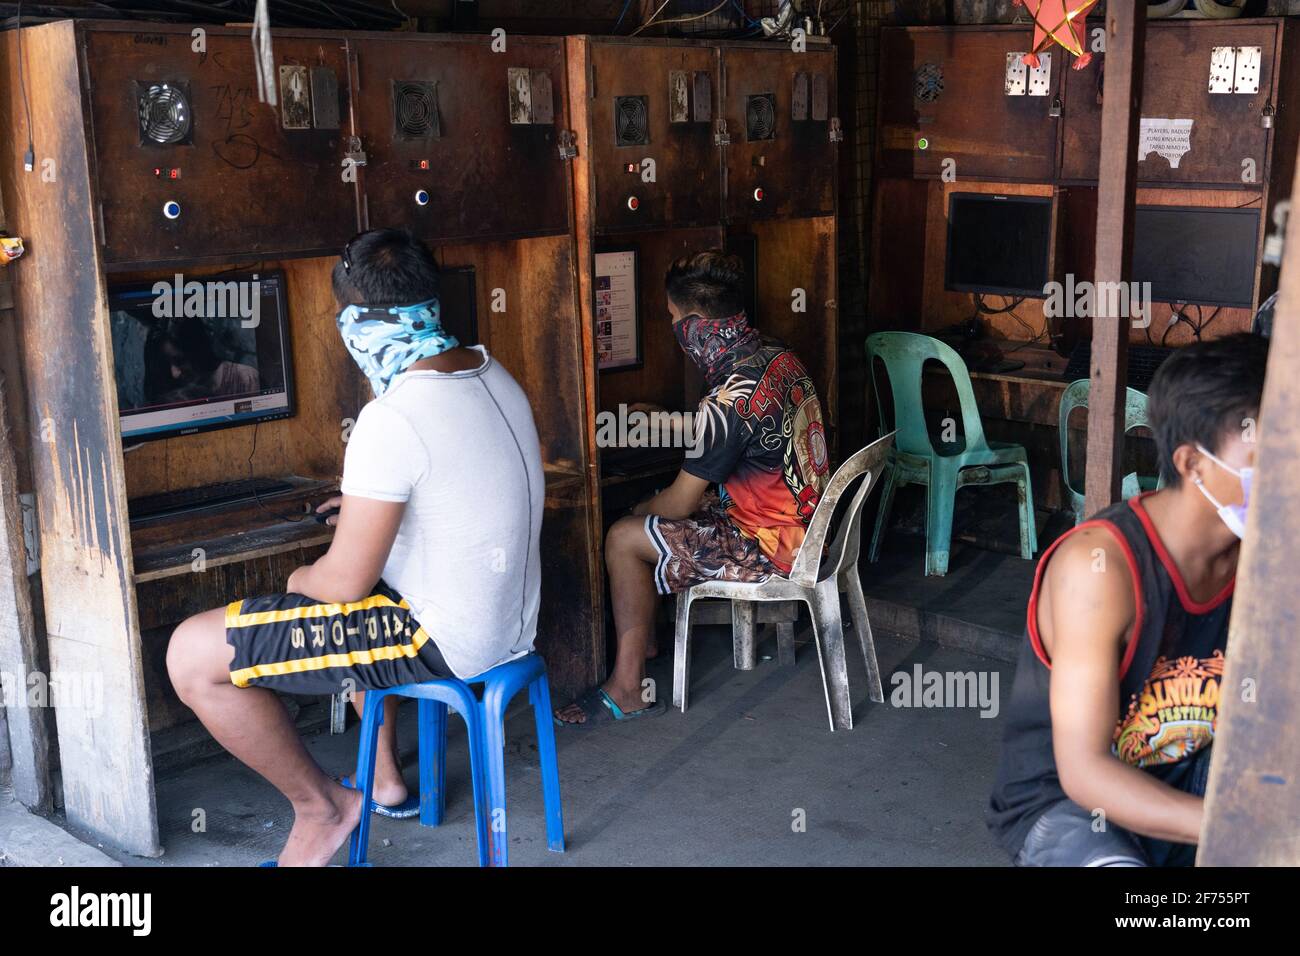 Teenagers using an internet cafe in a poor area of Cebu City, Philippines Stock Photo